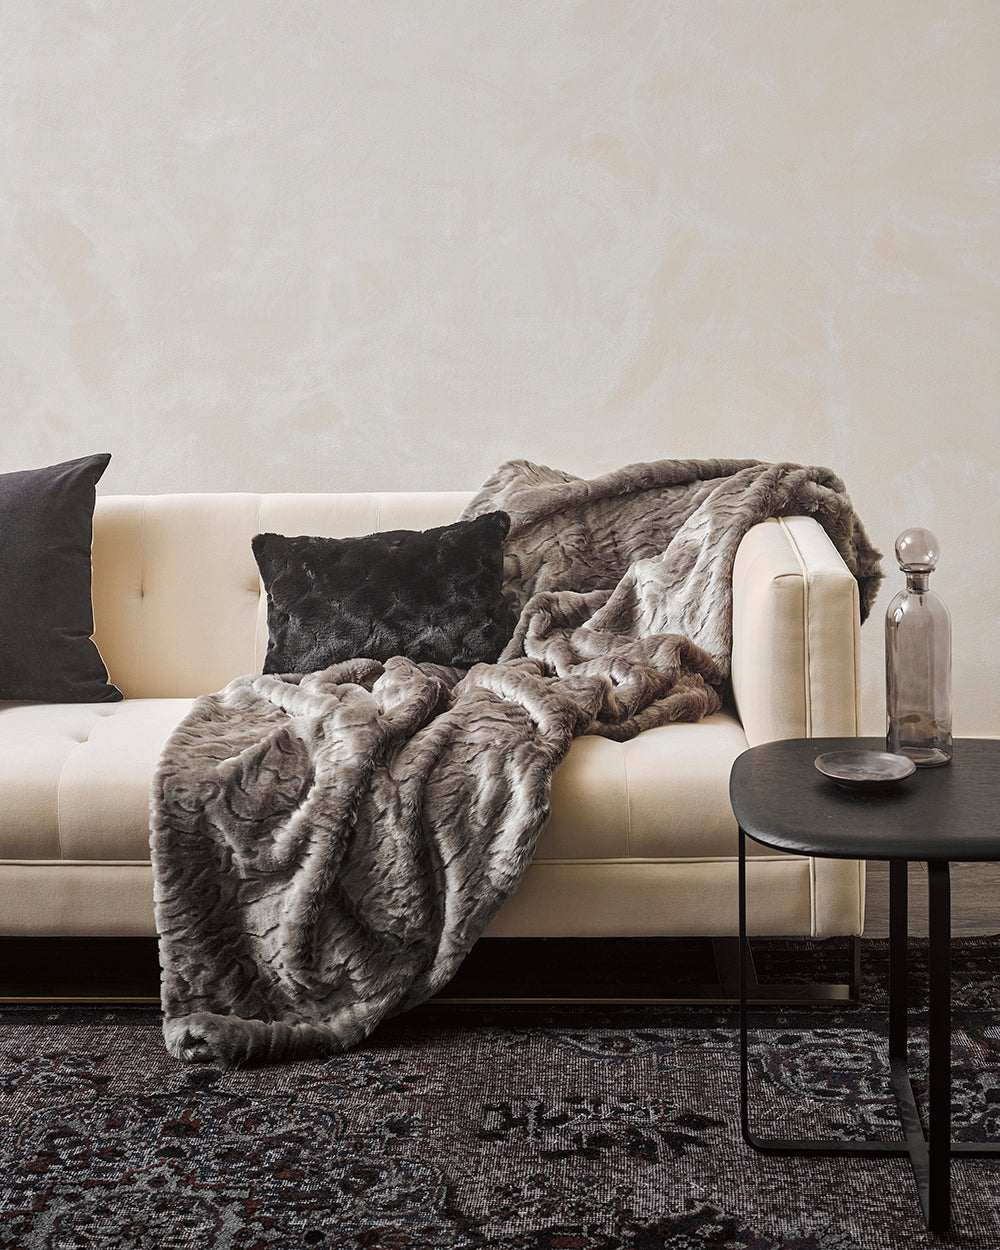 Heirloom Valentina Black Cushions in Faux Fur are available from Make Your House A Home Premium Stockist. Furniture Store Bendigo, Victoria. Australia Wide Delivery. Furtex Baya.